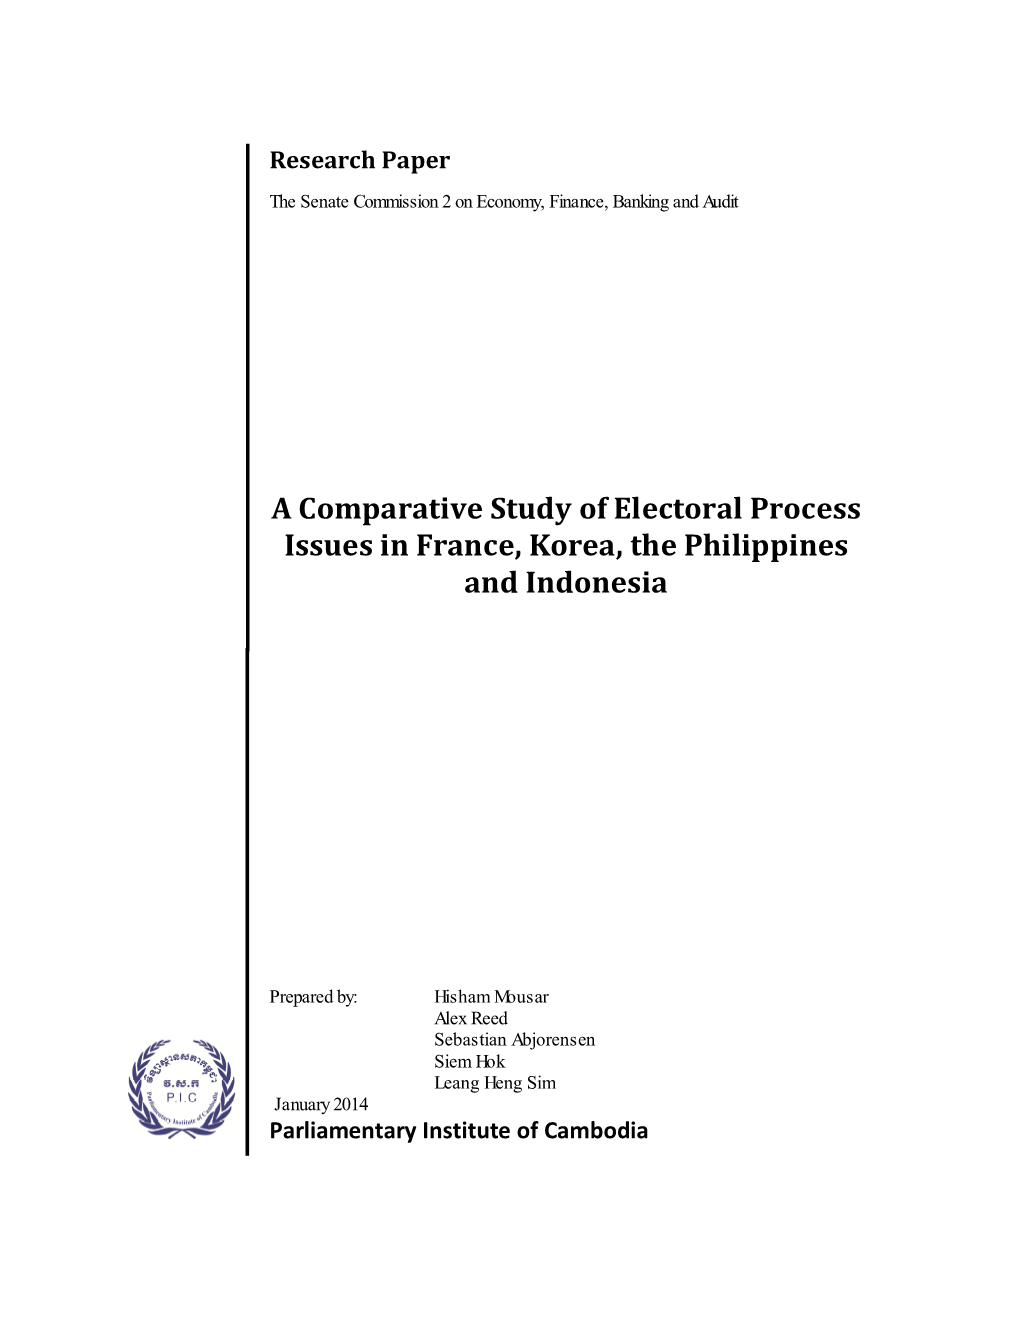 A Comparative Study of Electoral Process Issues in France, Korea